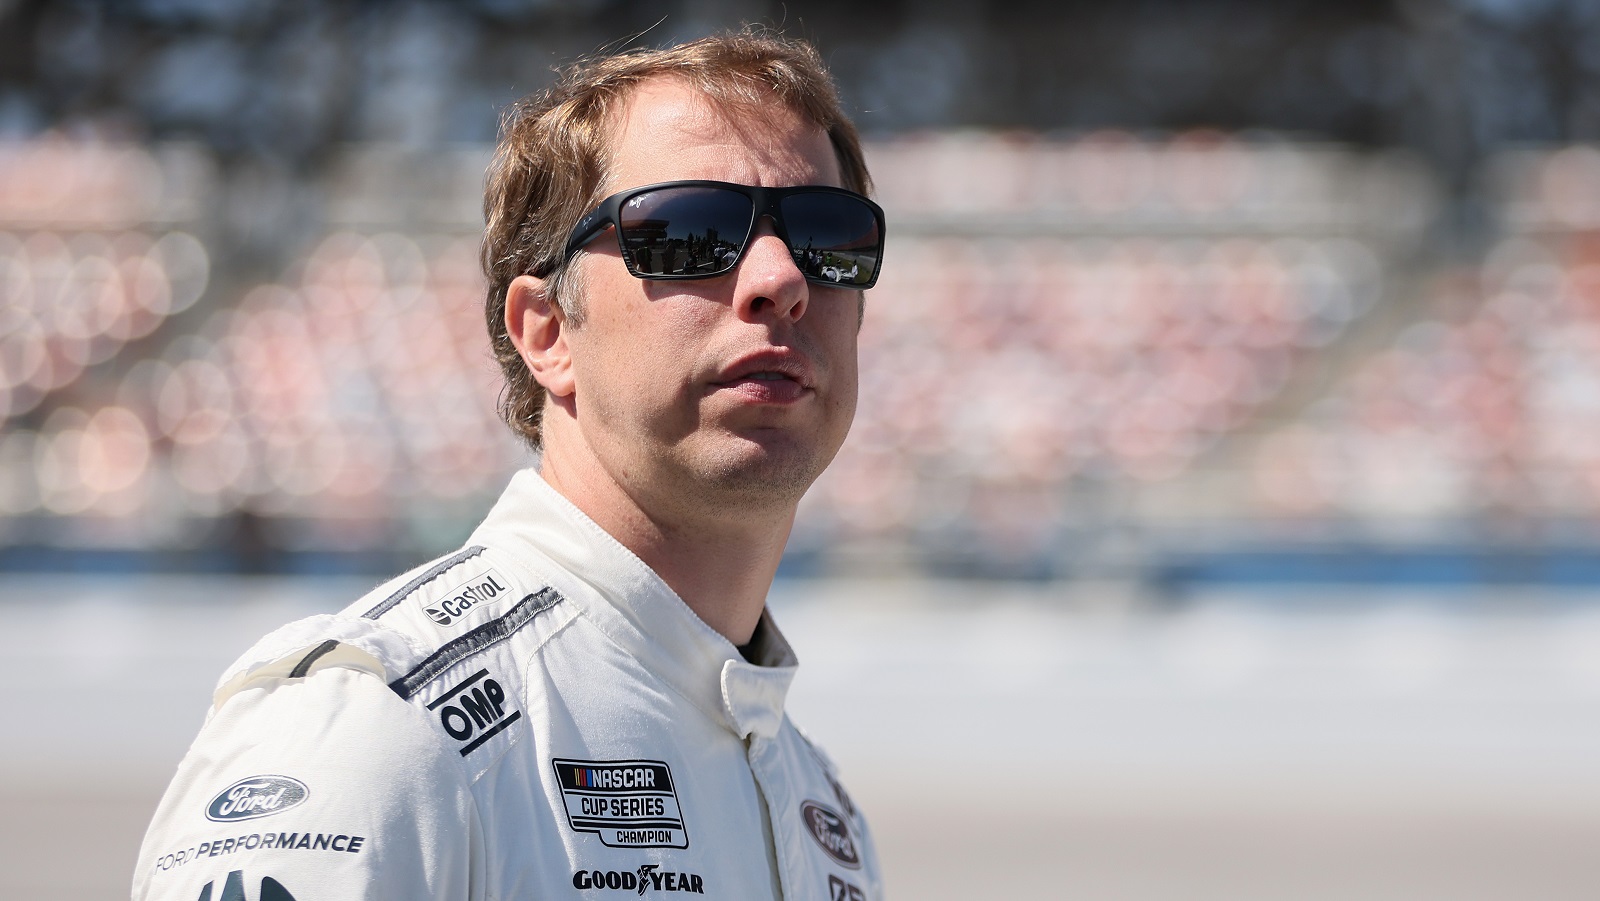 Brad Keselowski, driver of the No. 6 Ford, waits on the grid during qualifying for the NASCAR Cup Series GEICO 500 at Talladega Superspeedway on April 23, 2022.